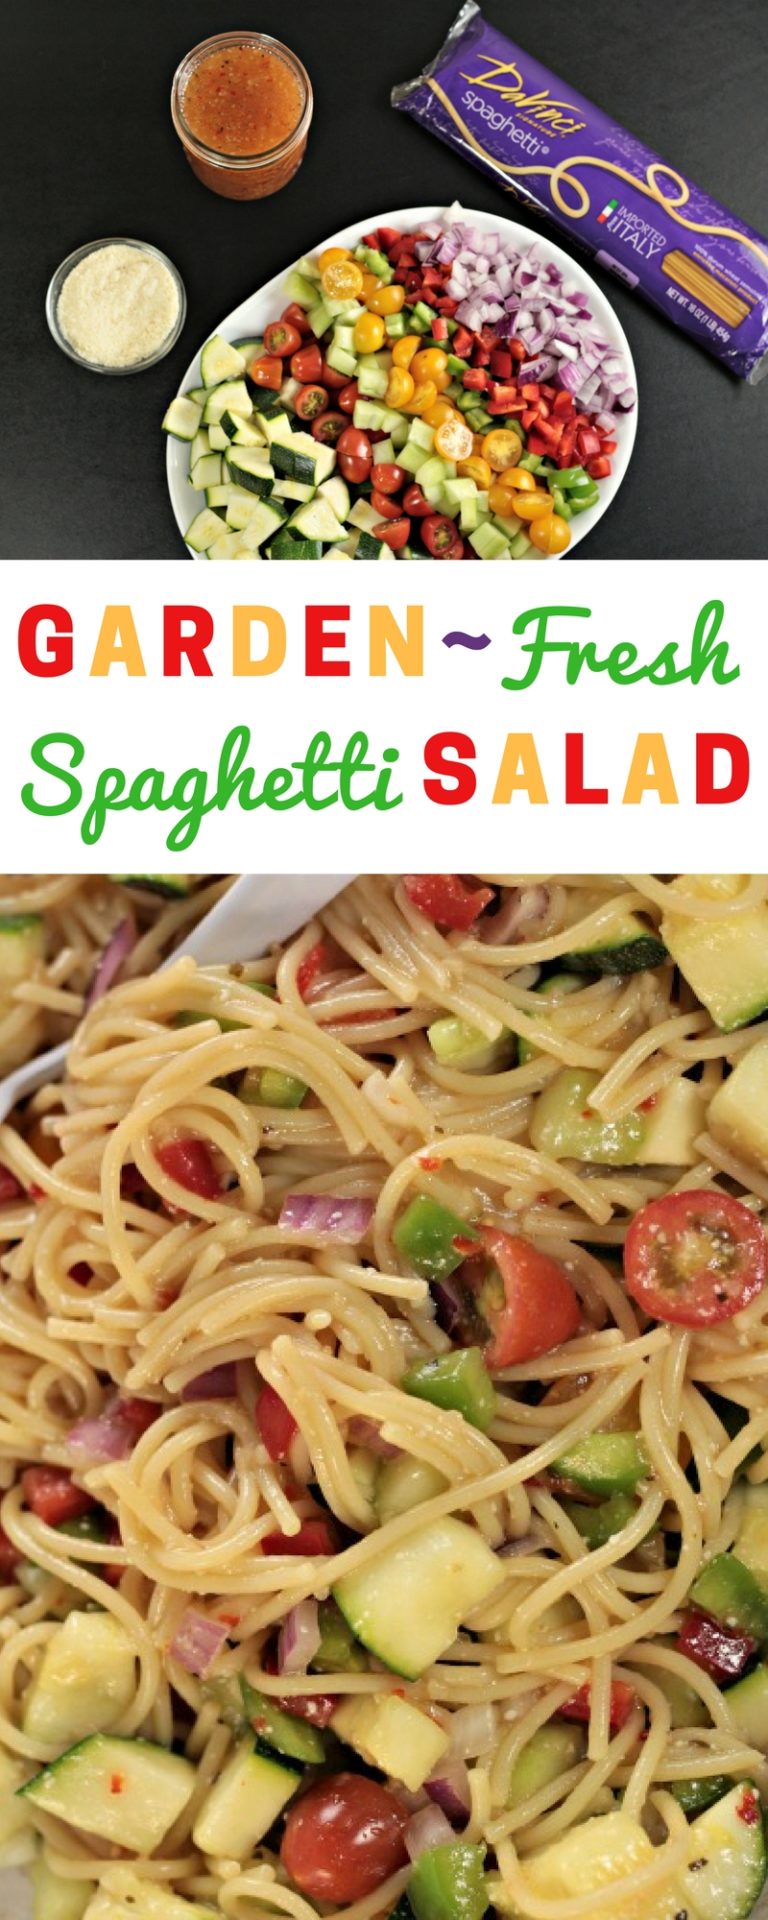 Garden-Fresh Spaghetti Salad - Mindy's Cooking Obsession